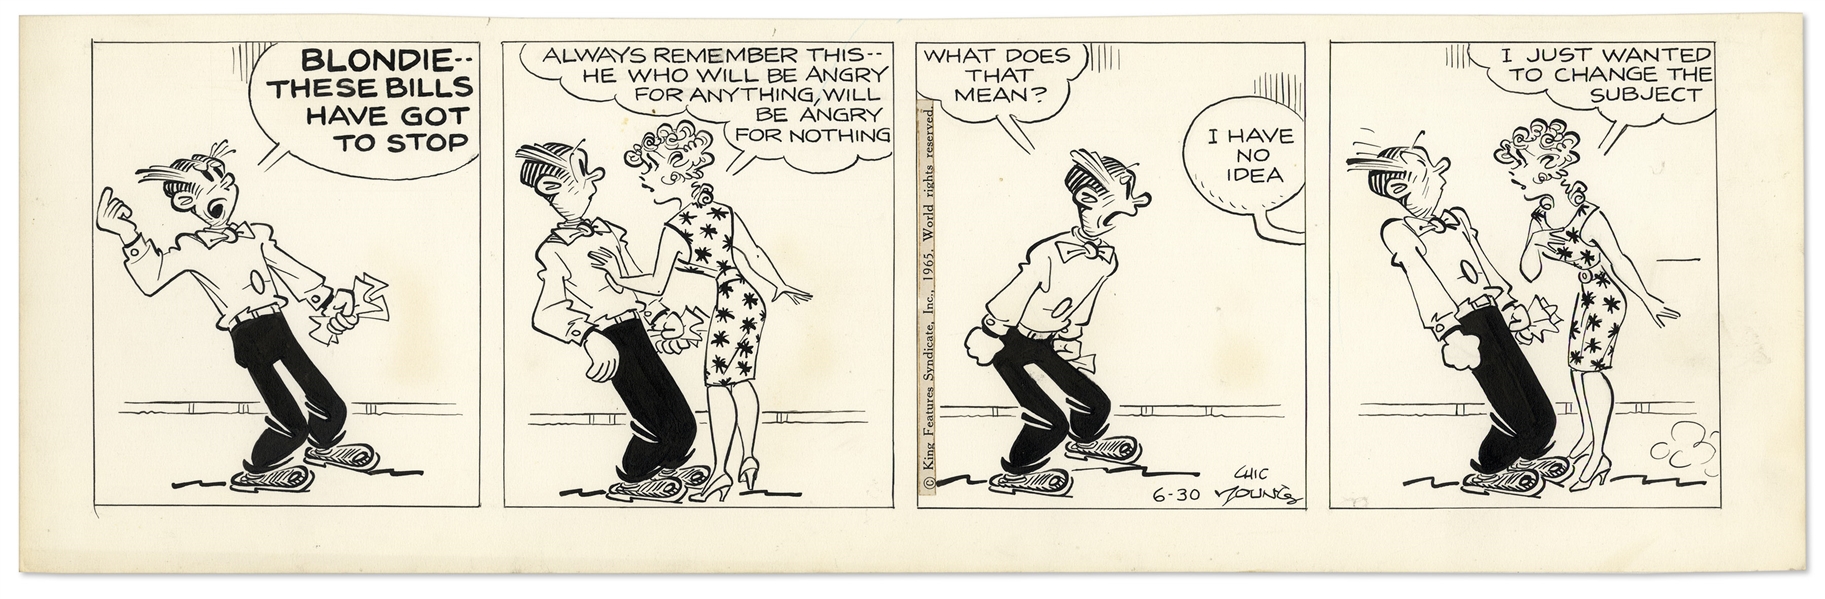 2 Chic Young Hand-Drawn ''Blondie'' Comic Strips From 1965 -- With Chic Young's Original Artwork for Both